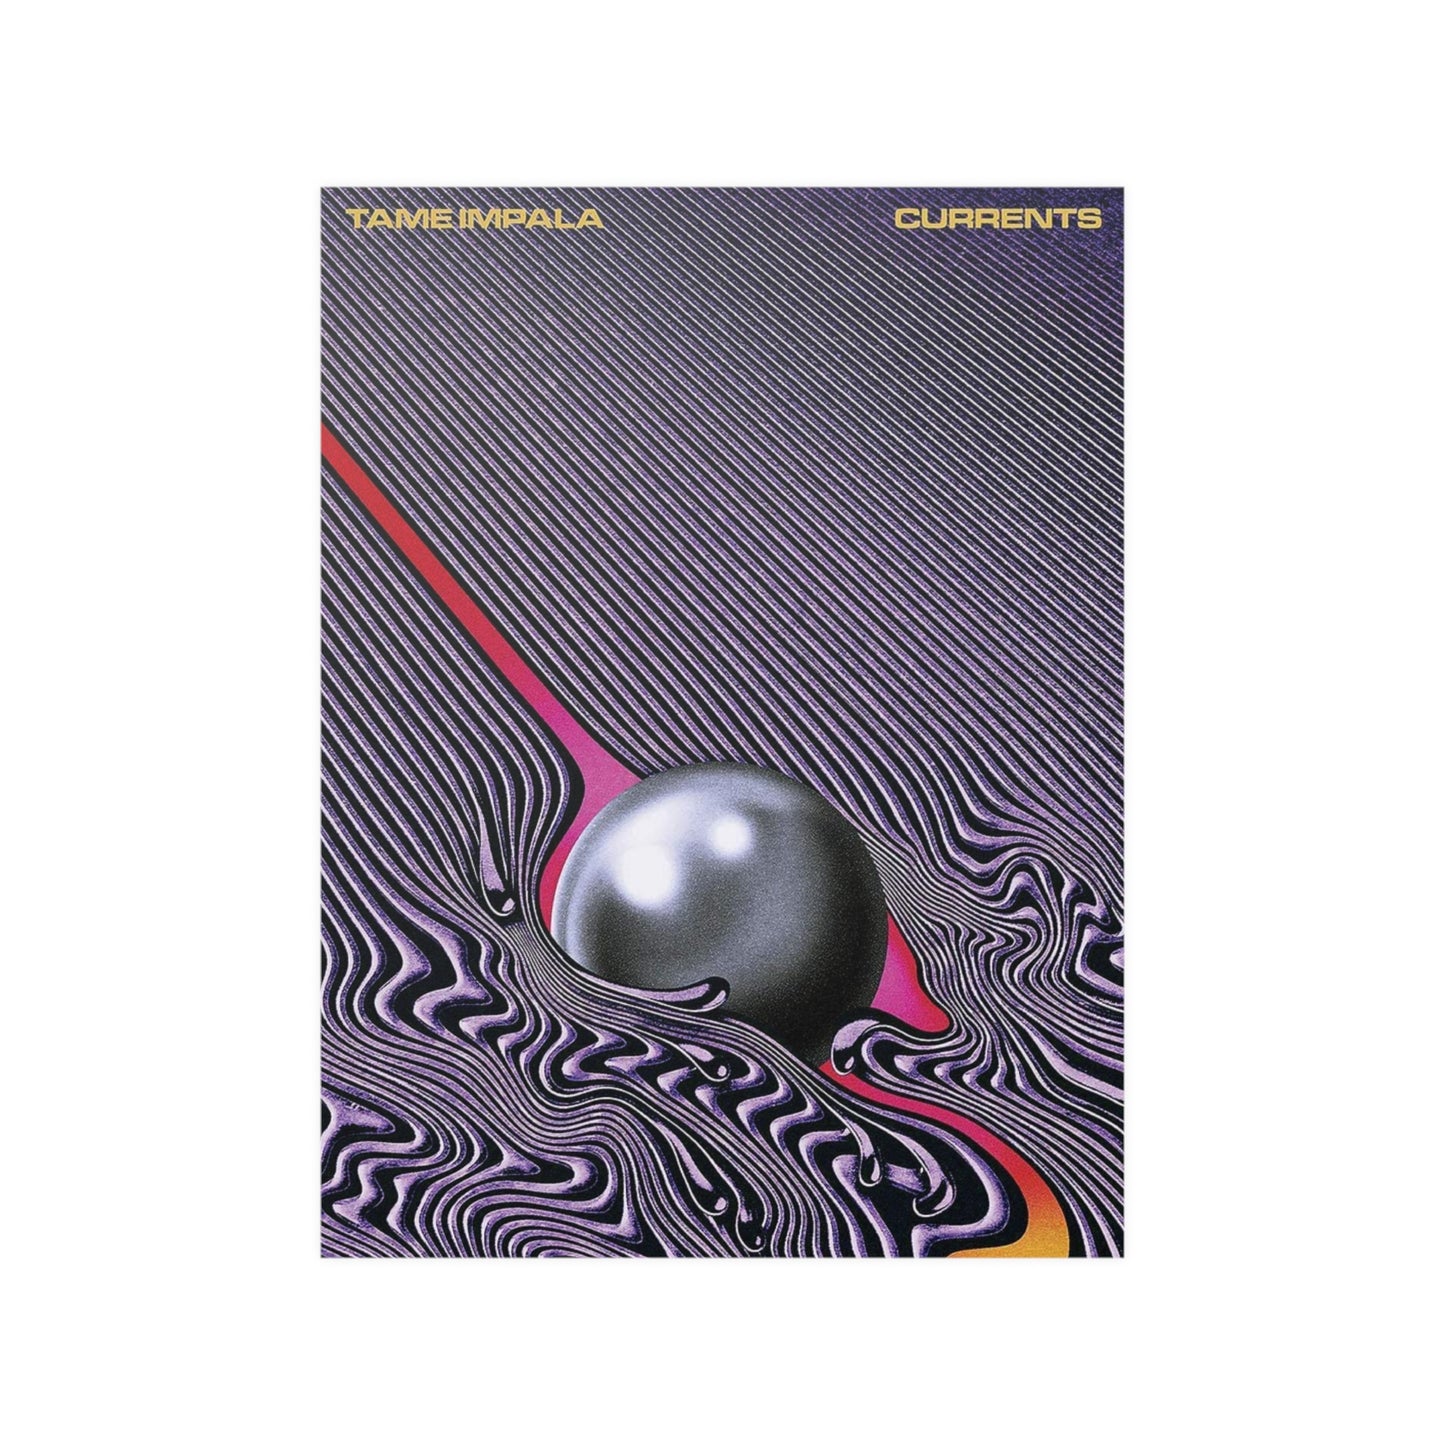 Tame Impala Currents Poster.